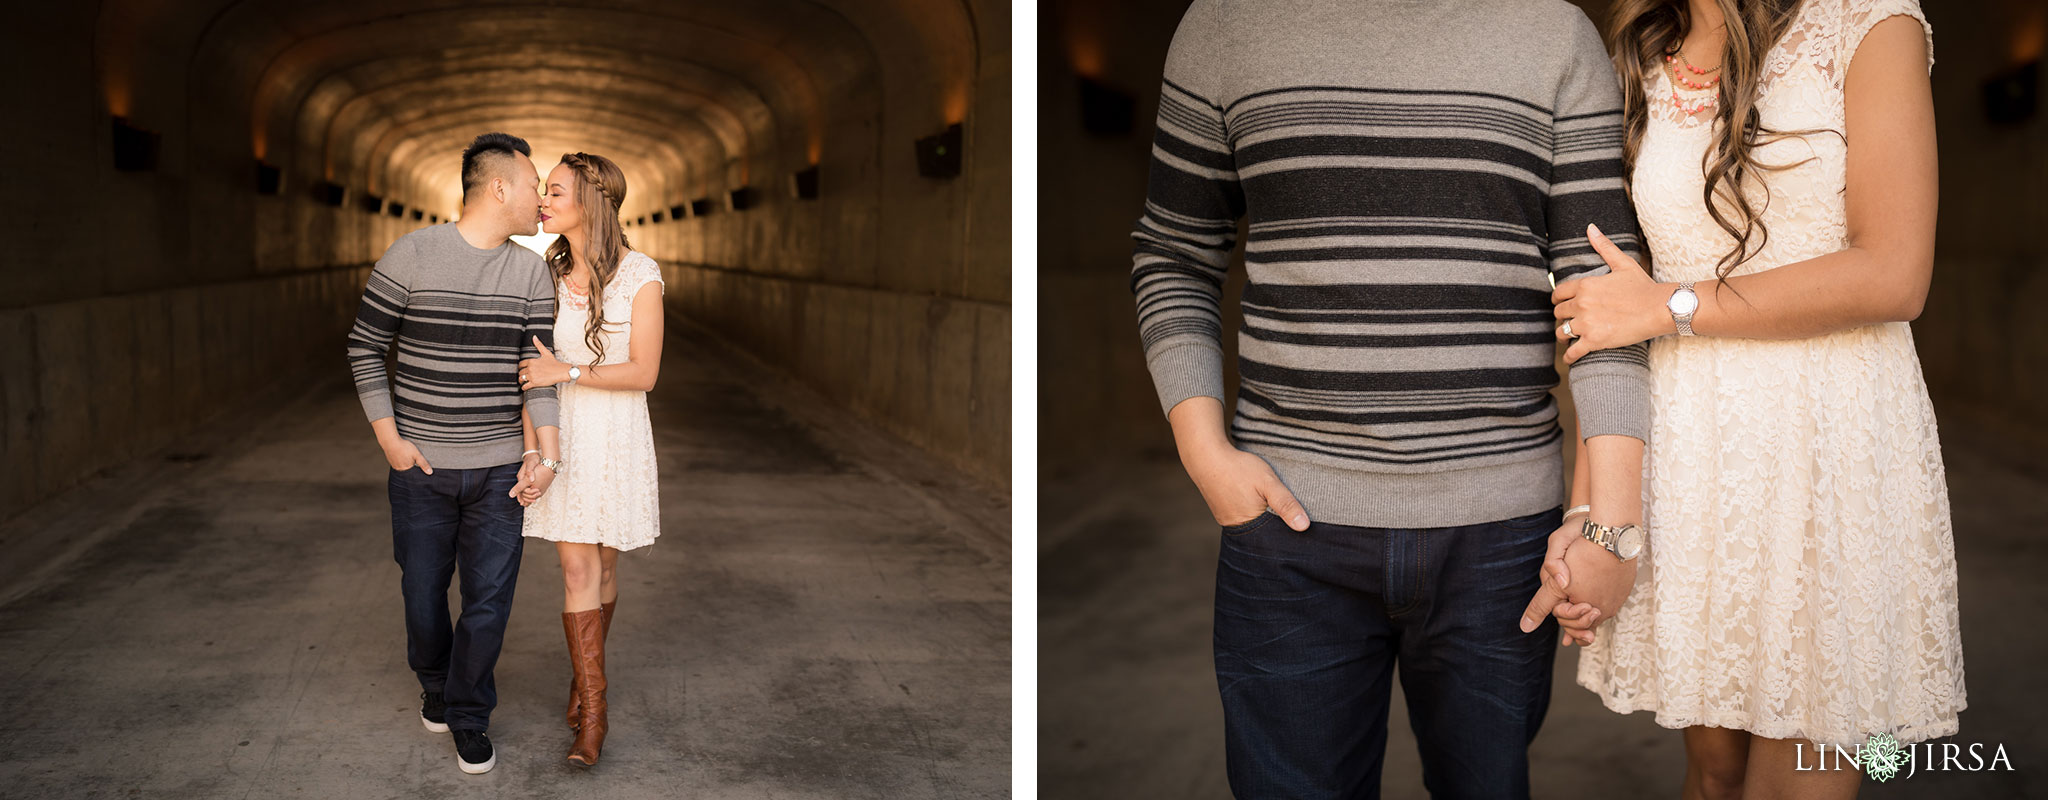 10 jeffrey open space trail orange county engagement photography